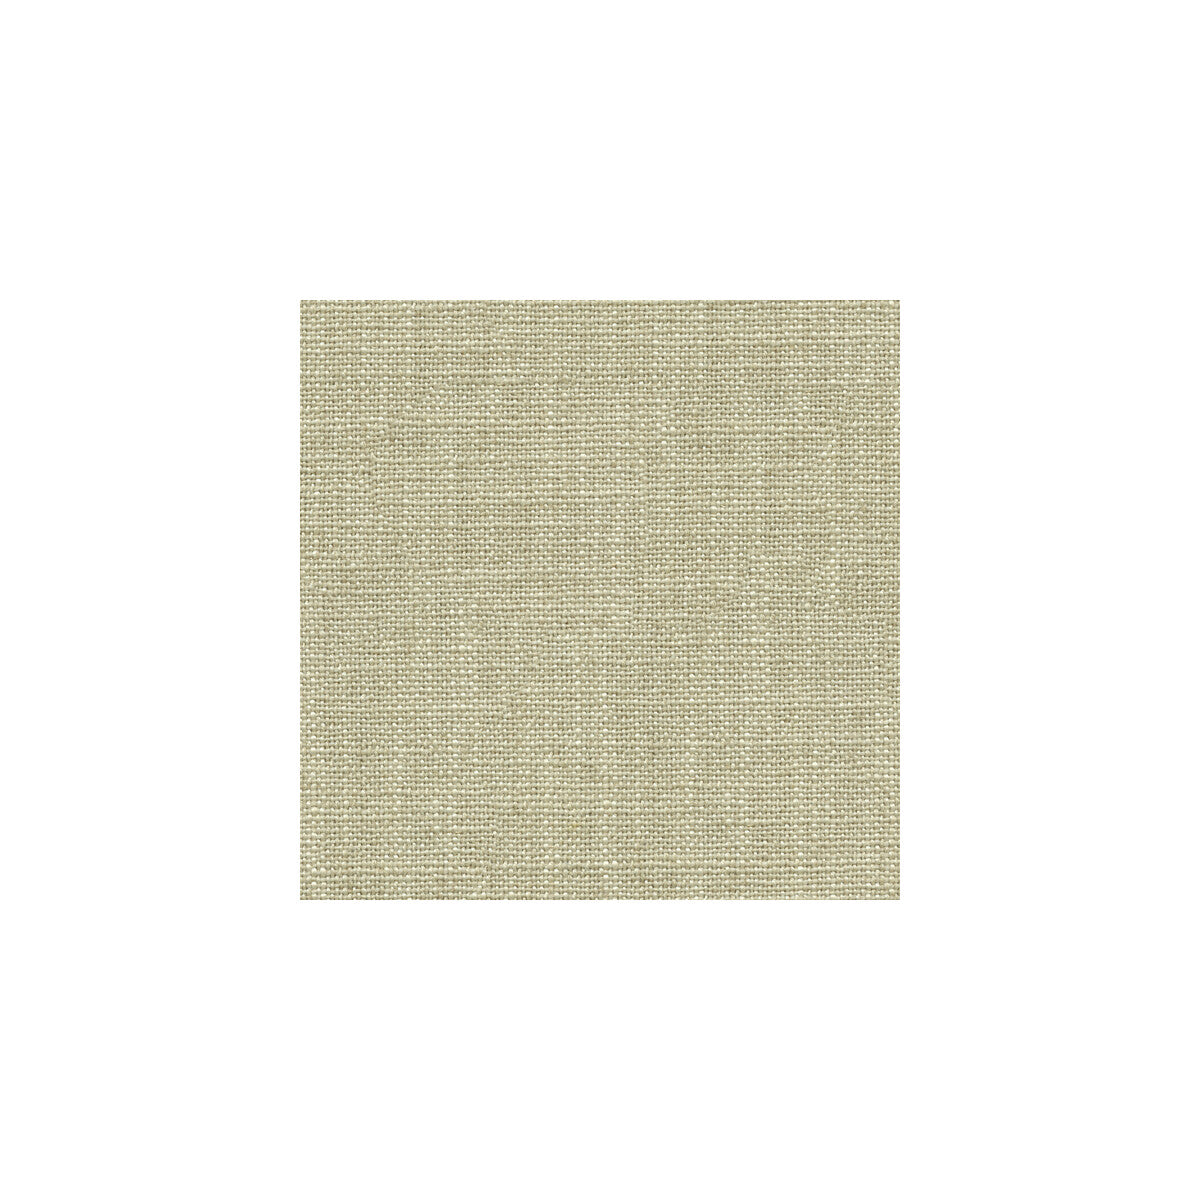 Kravet Design fabric in 33166-16 color - pattern 33166.16.0 - by Kravet Design in the Echo Heirloom India collection